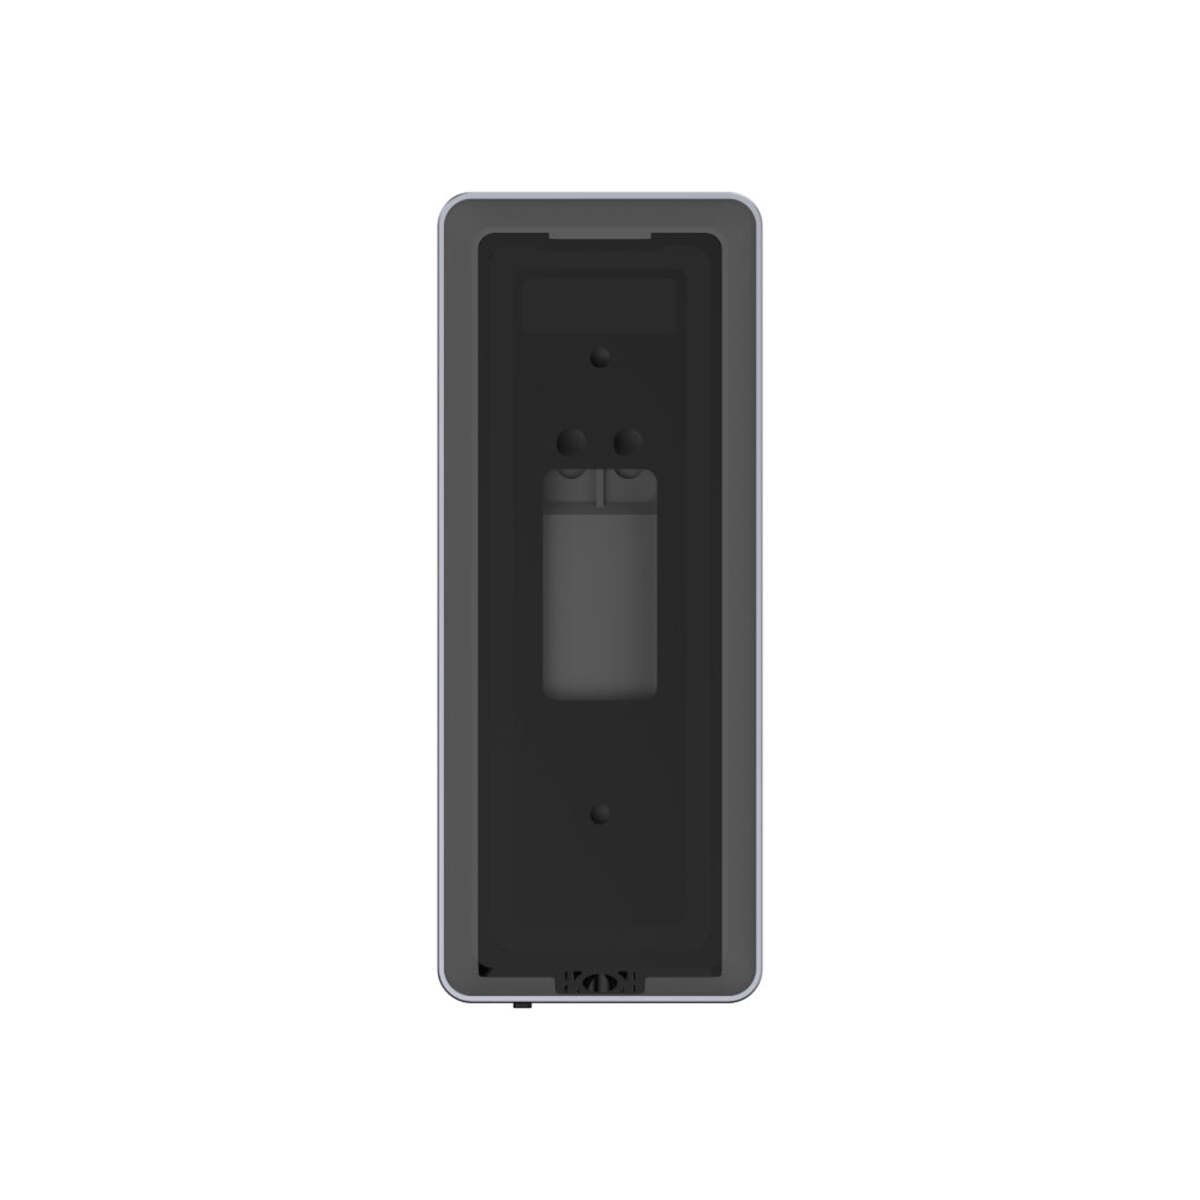 ARENTI Outdoor Battery Powered Doorbell - 2K Wi-Fi Video - x1 Wireless Chime - Black